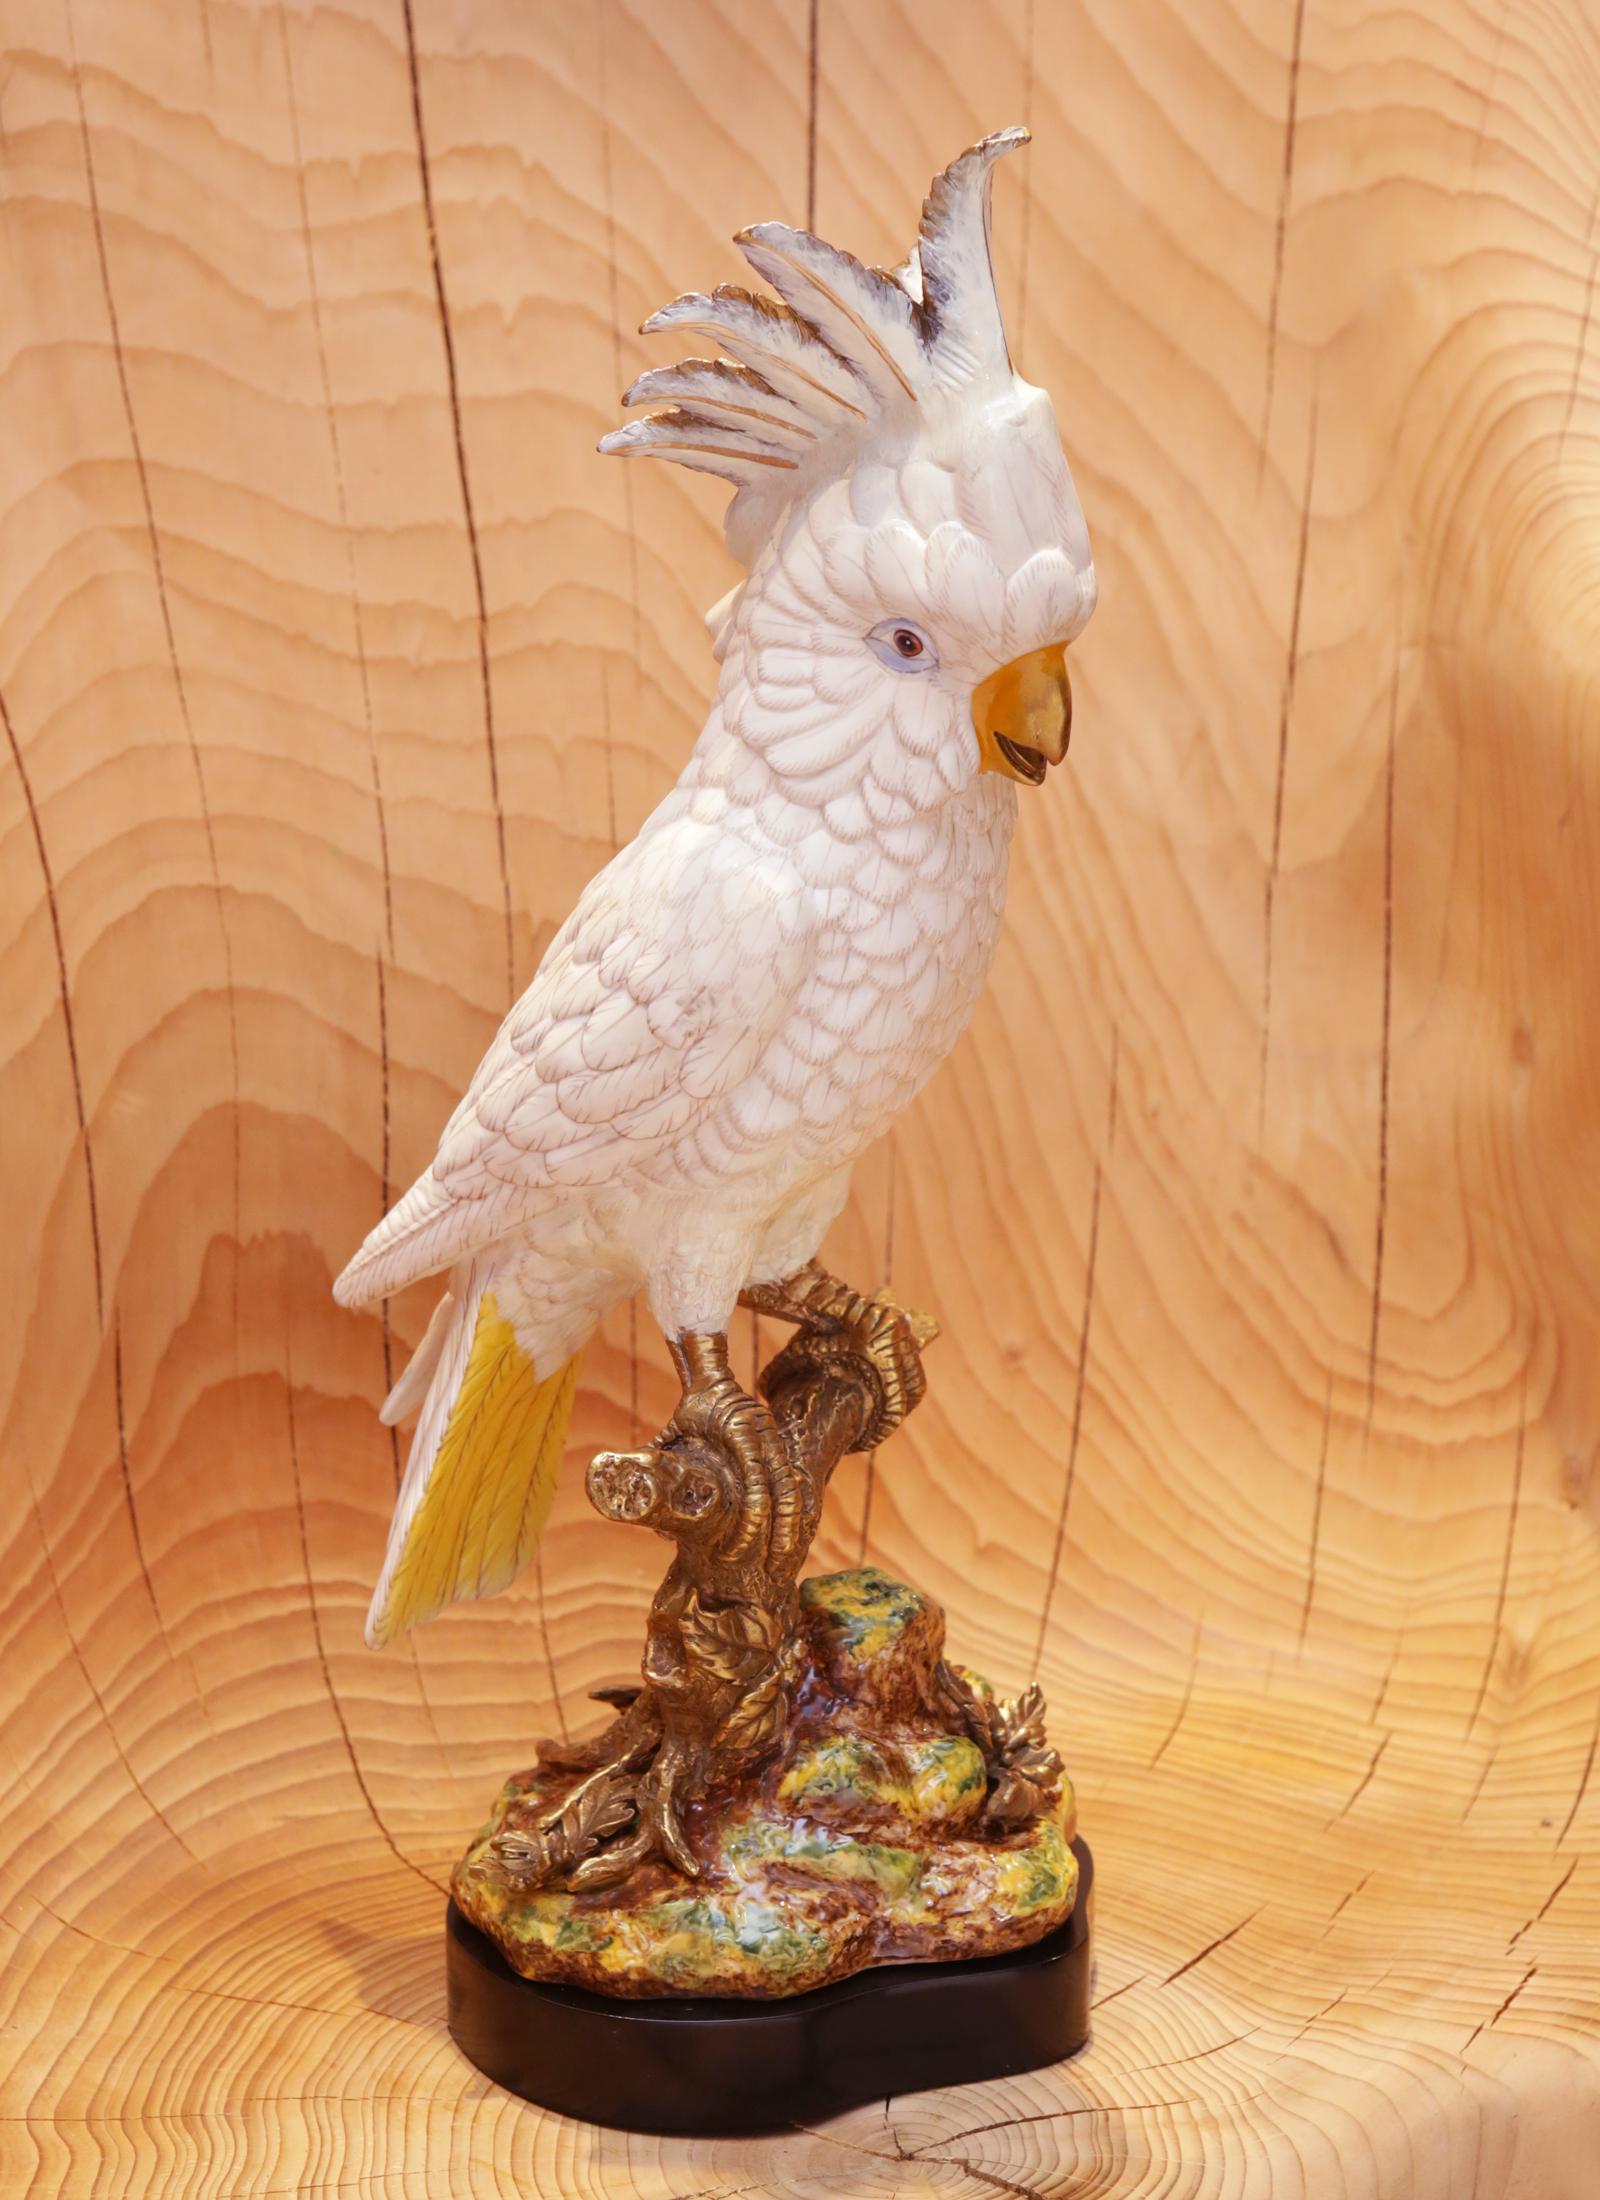 Sculpture parrot and porcelain
made in solid porcelain, hand-painted
finish, on solid bronze and porcelain base.